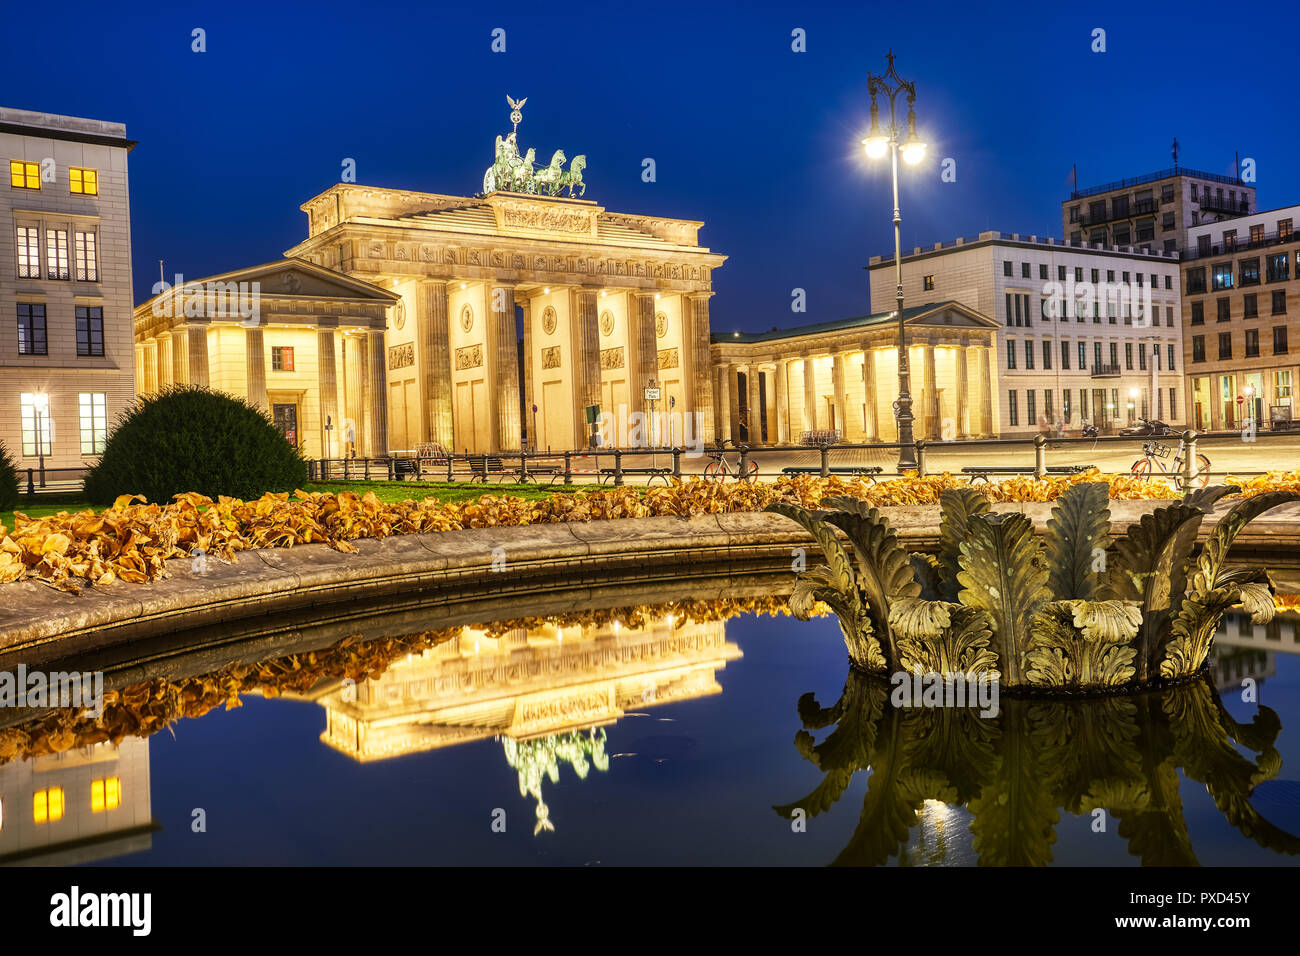 The famous Brandenburger Tor in Berlin at night, reflected in a fountain Stock Photo